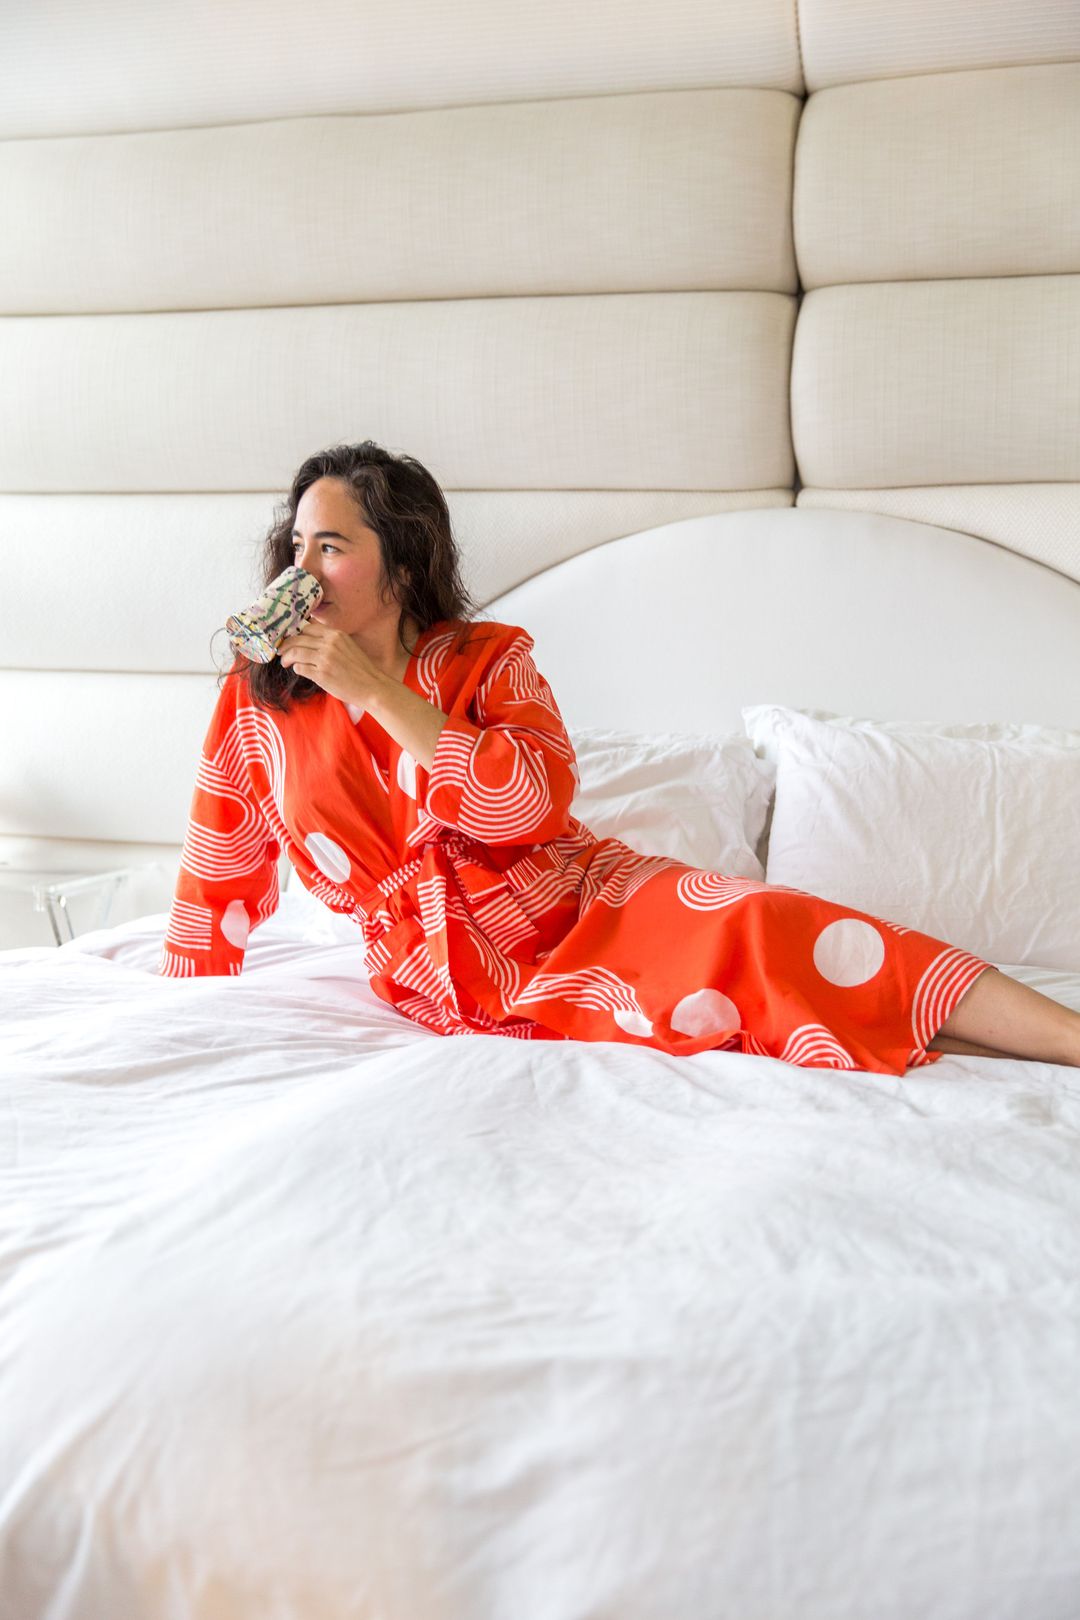 A woman lounges on a bed while sipping a drink and wearing a robe.